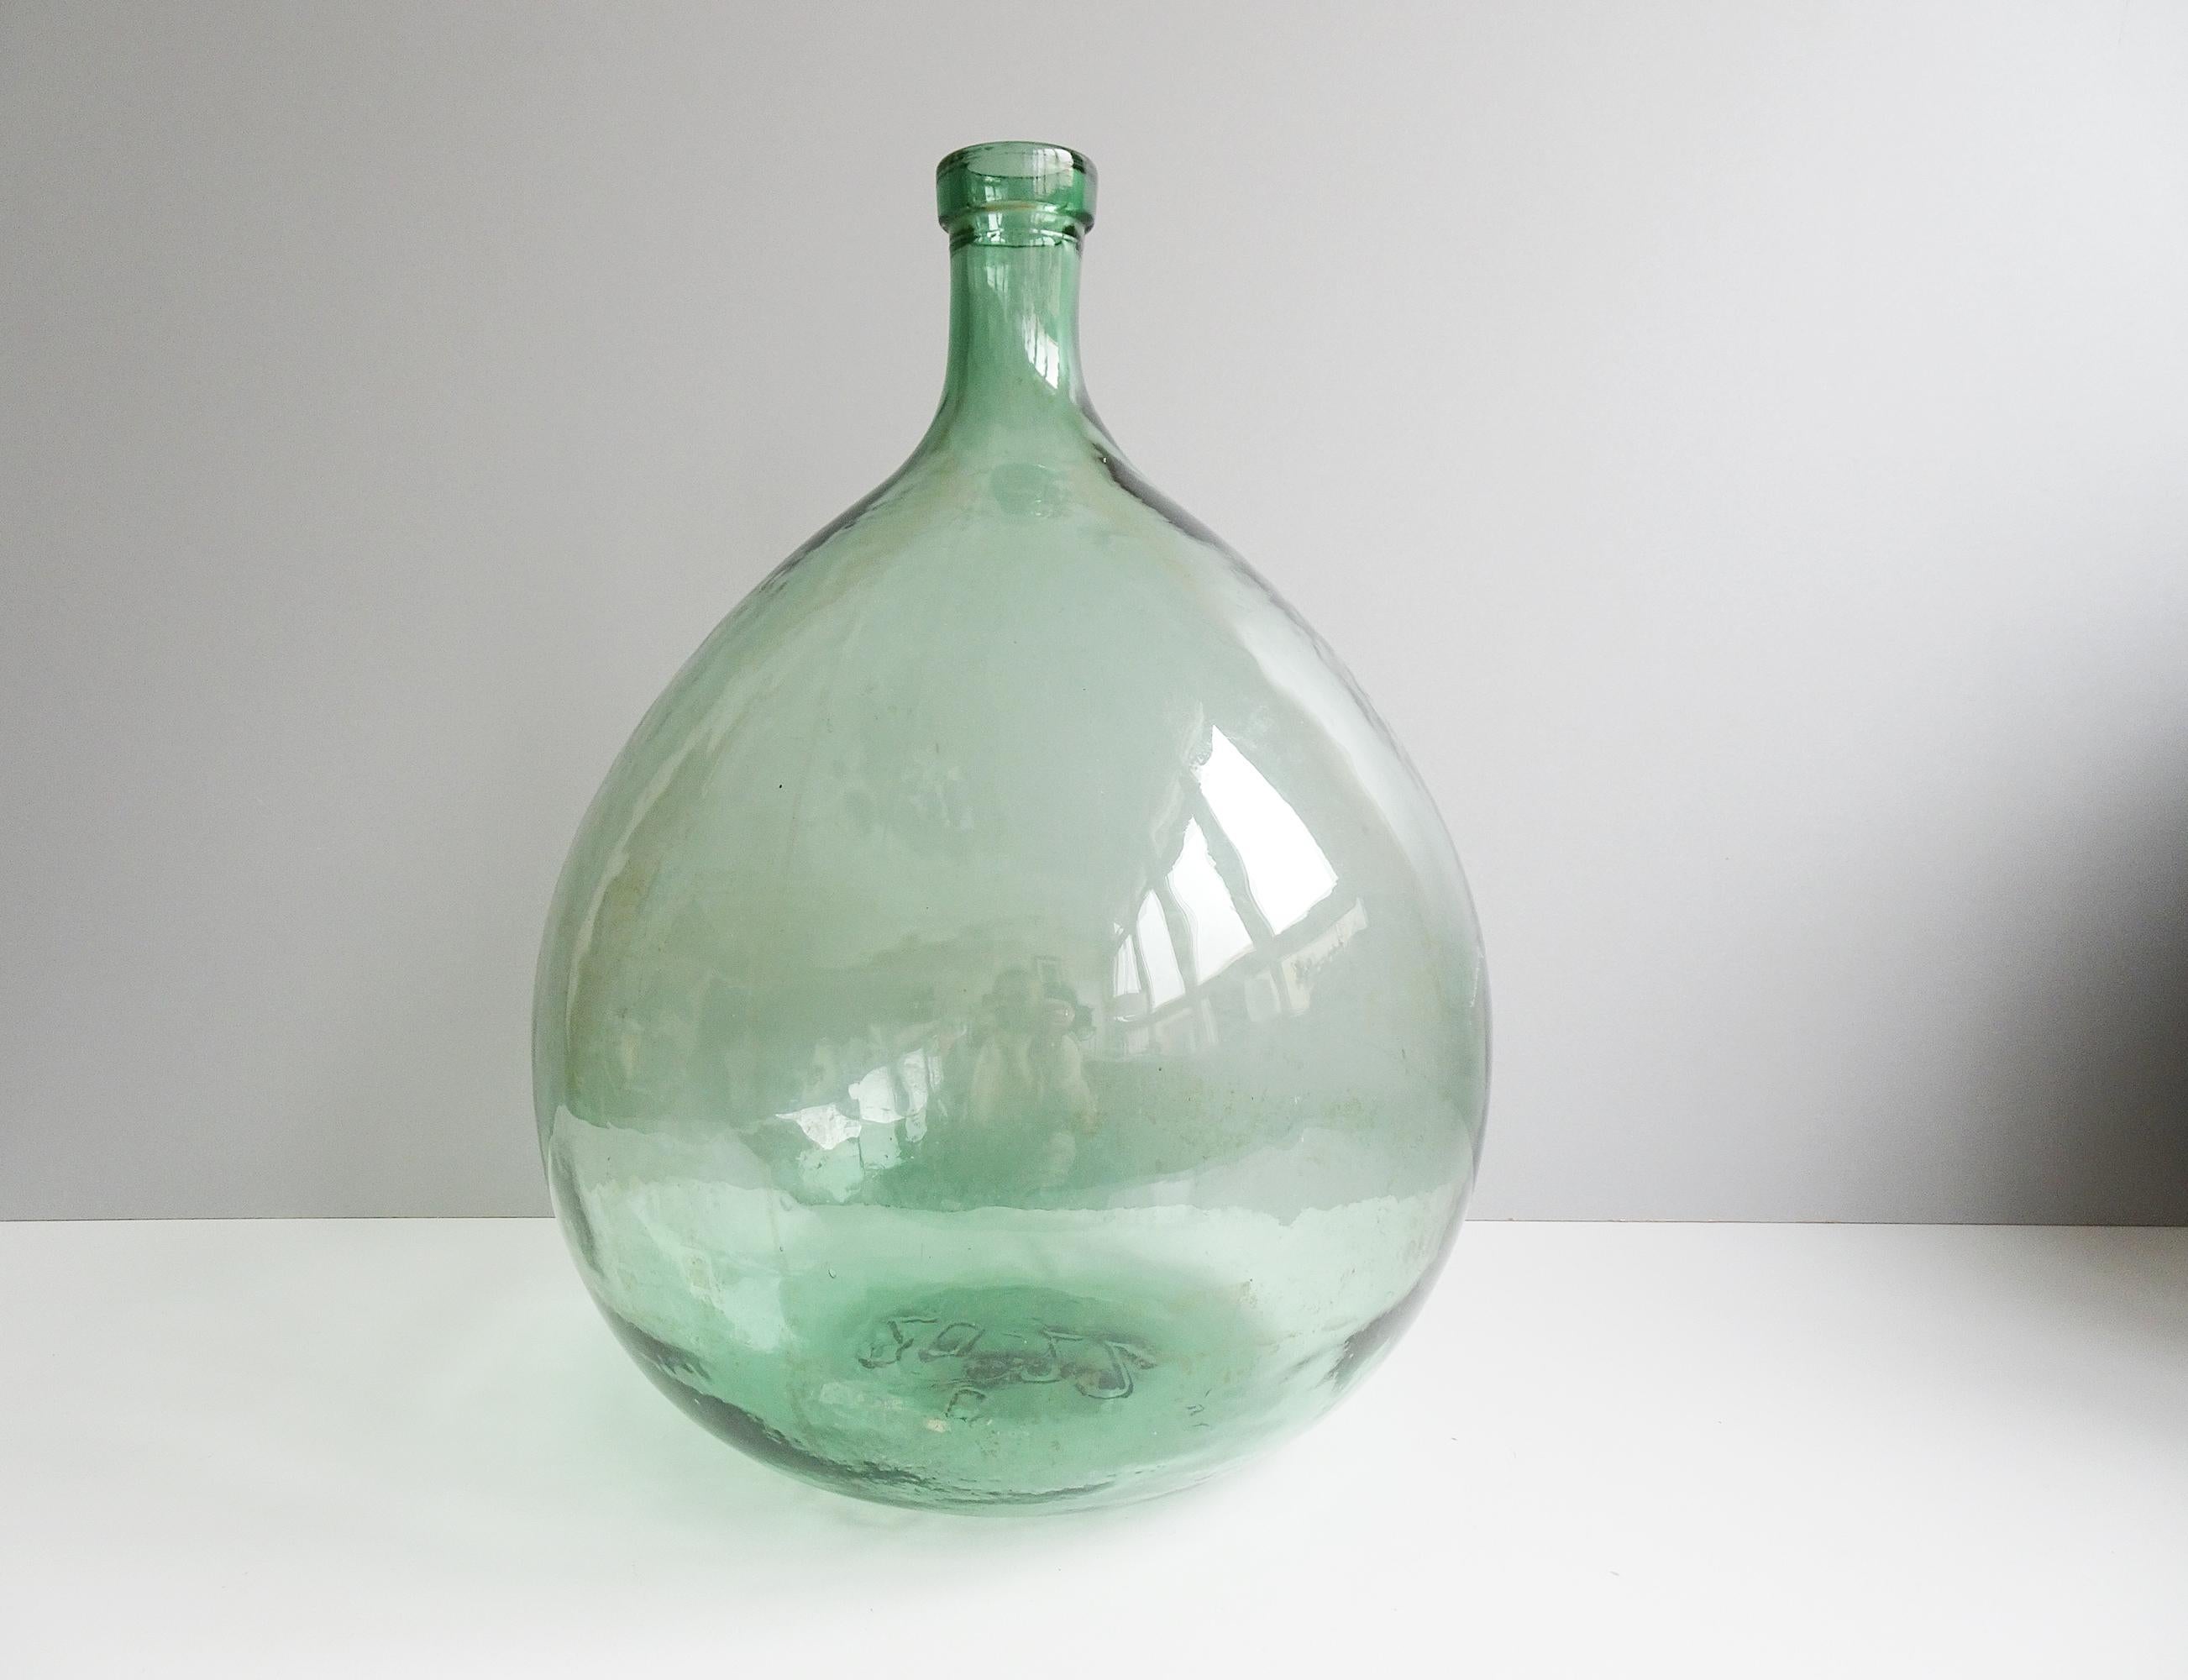 Large imposing glass balloon in light green. A great timeless home accessory that is ideal as a floor vase for dried flowers and is a great light catcher. Due to its size and the good condition, the bottle is very decorative and a great eye-catcher